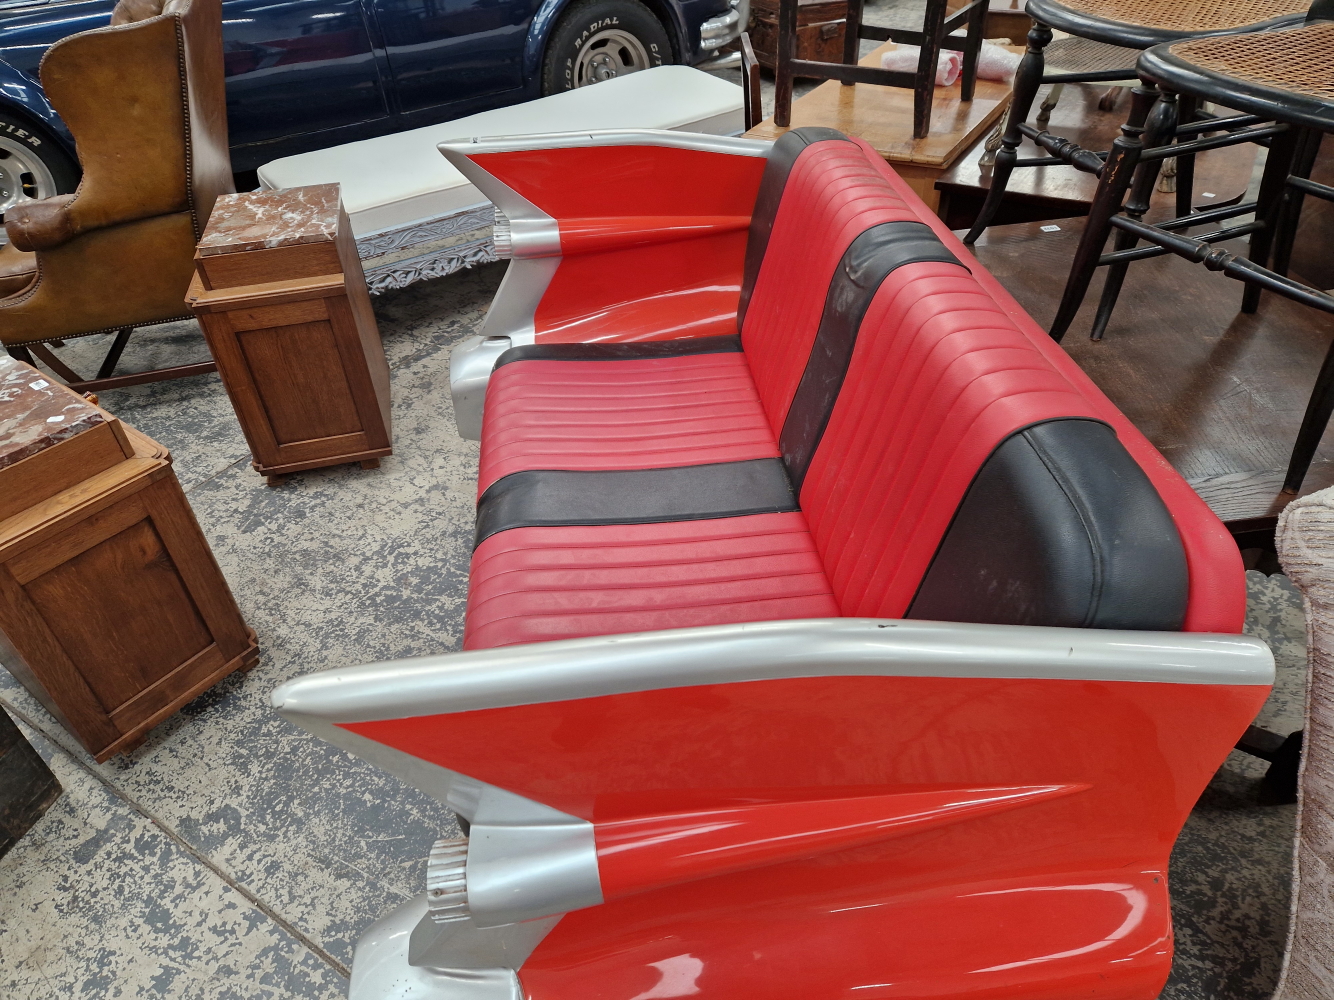 A MID CENTURY STYLE DINER SEAT FORMED AS THE TAIL END OF A CADILLAC - Image 4 of 4